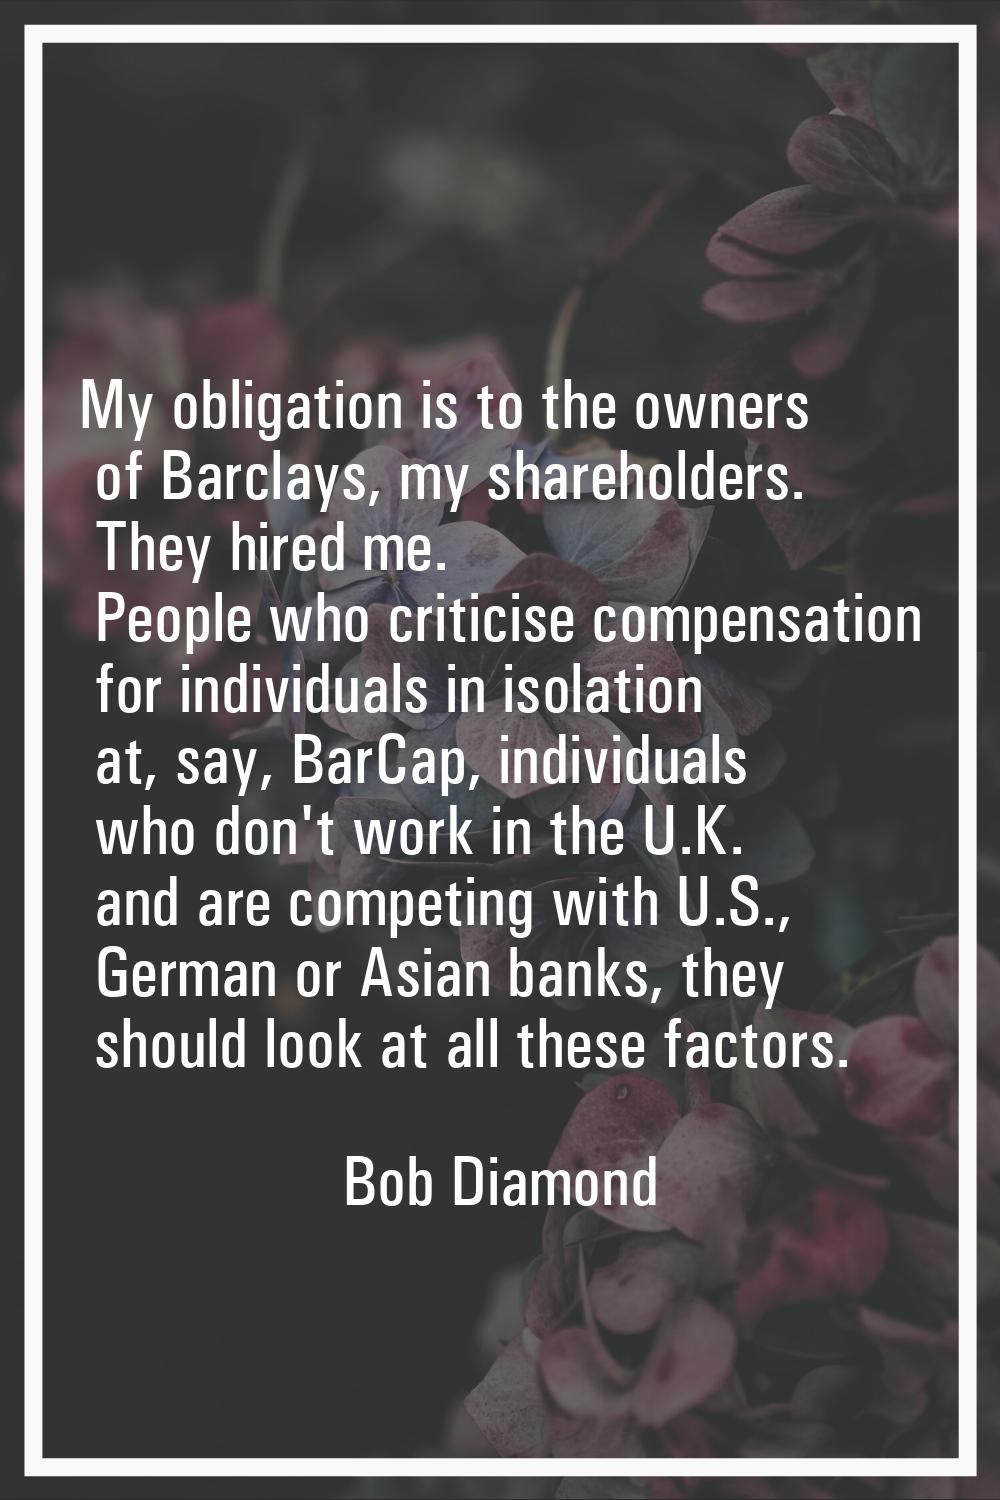 My obligation is to the owners of Barclays, my shareholders. They hired me. People who criticise co